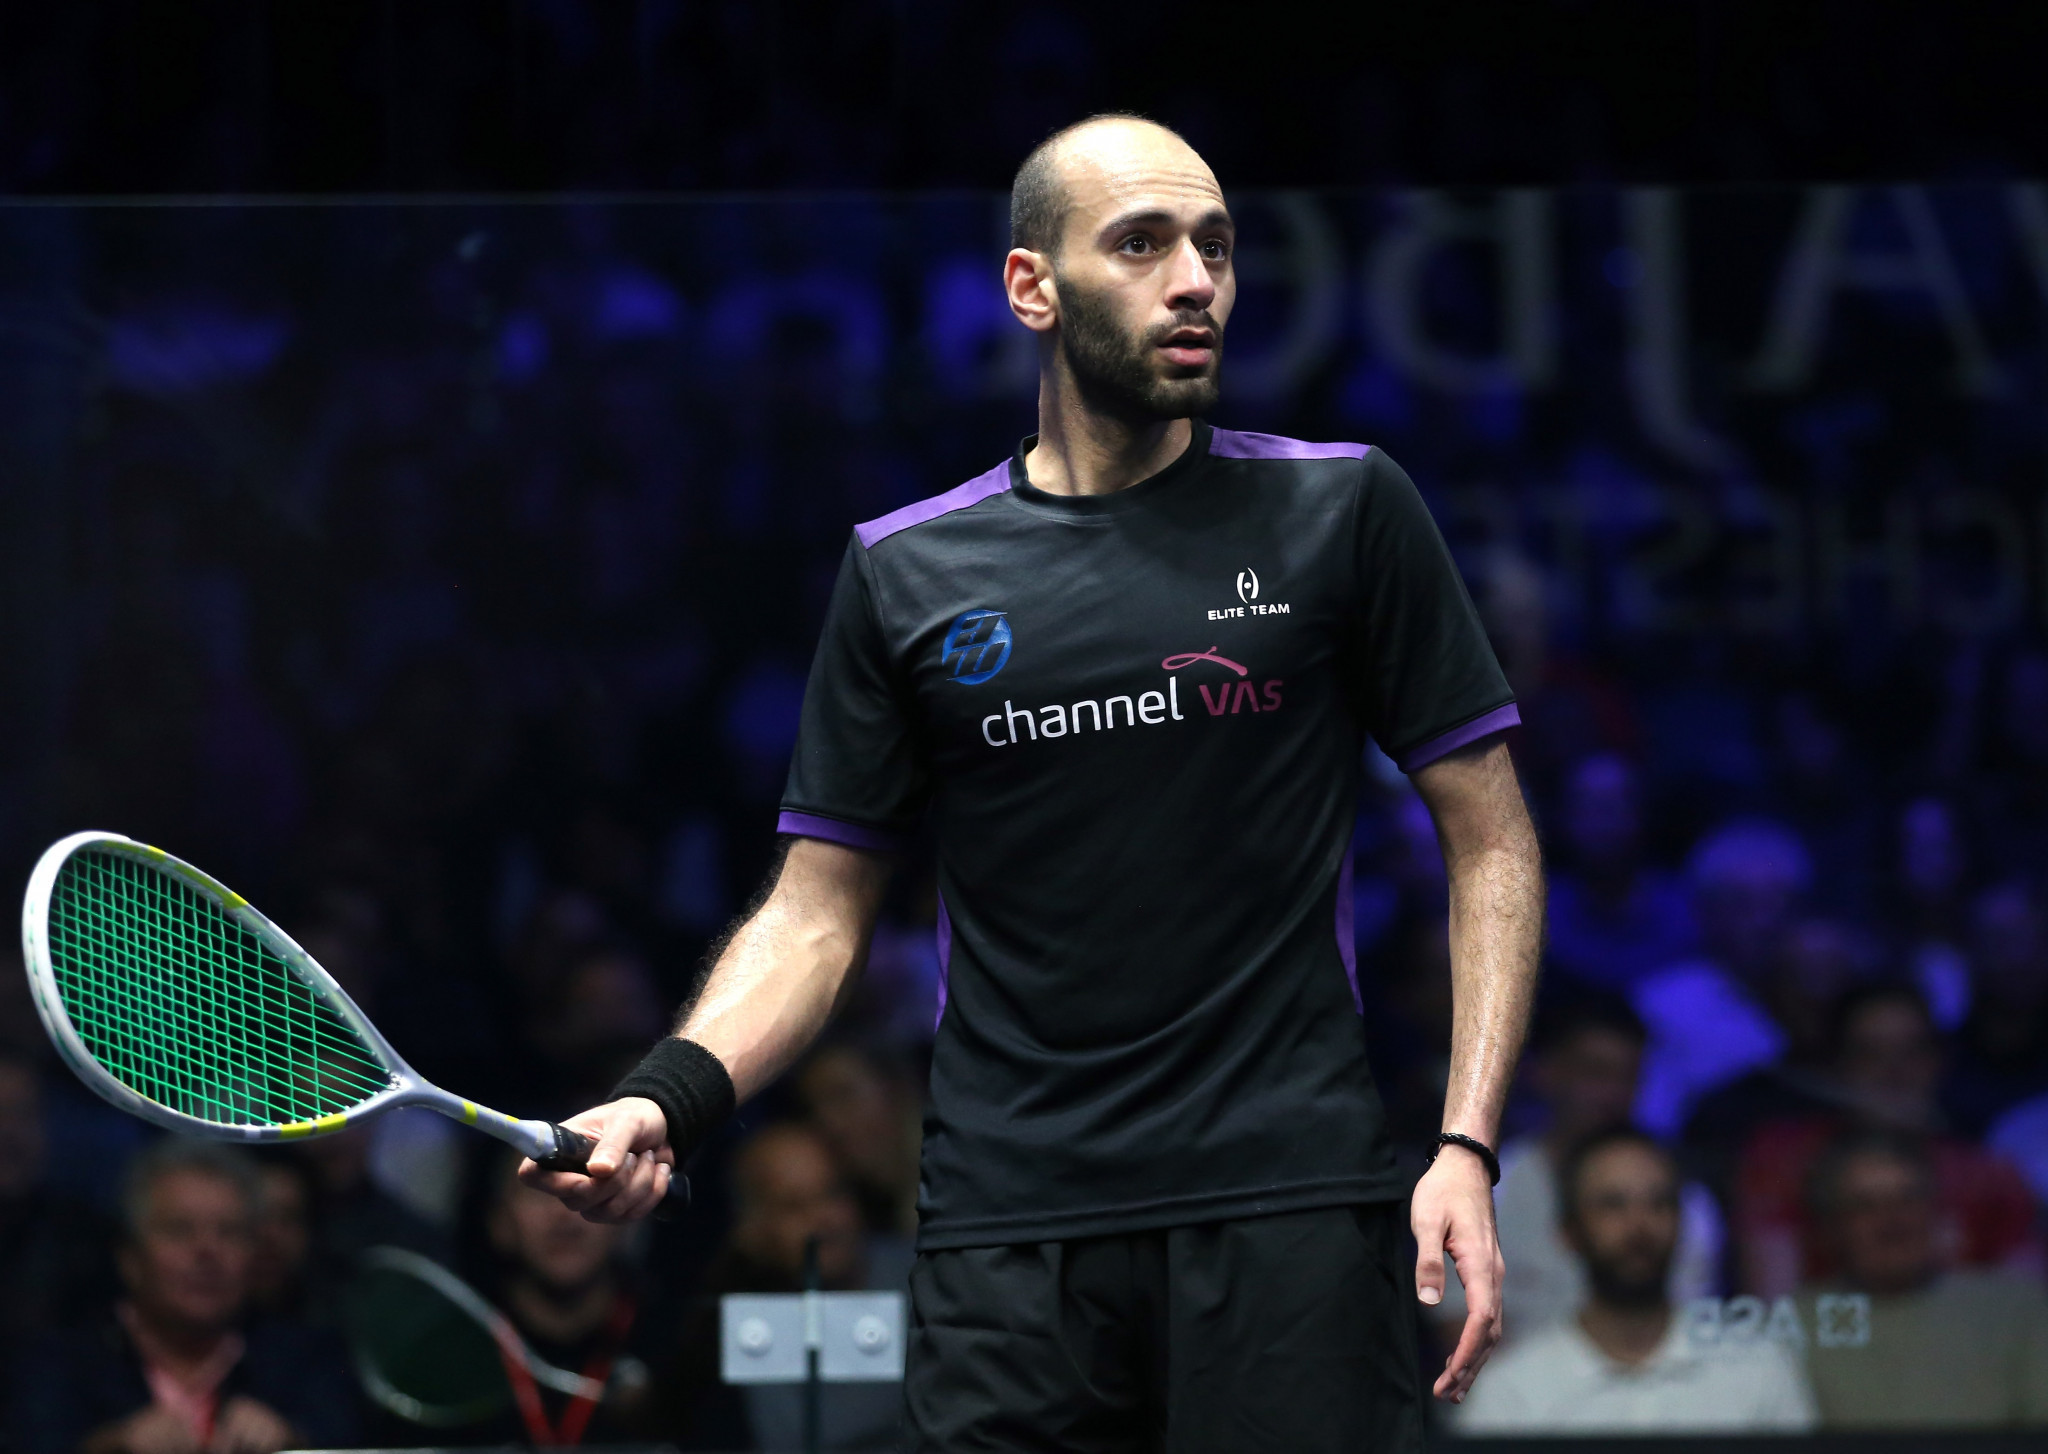 Egypt's Karim Abdel Gawad geared up for his clash with top ranked Ali Farag with a straight sets win over New Zealand's Paul Coll at the PSA World Tour Finals in Cairo ©Getty Images